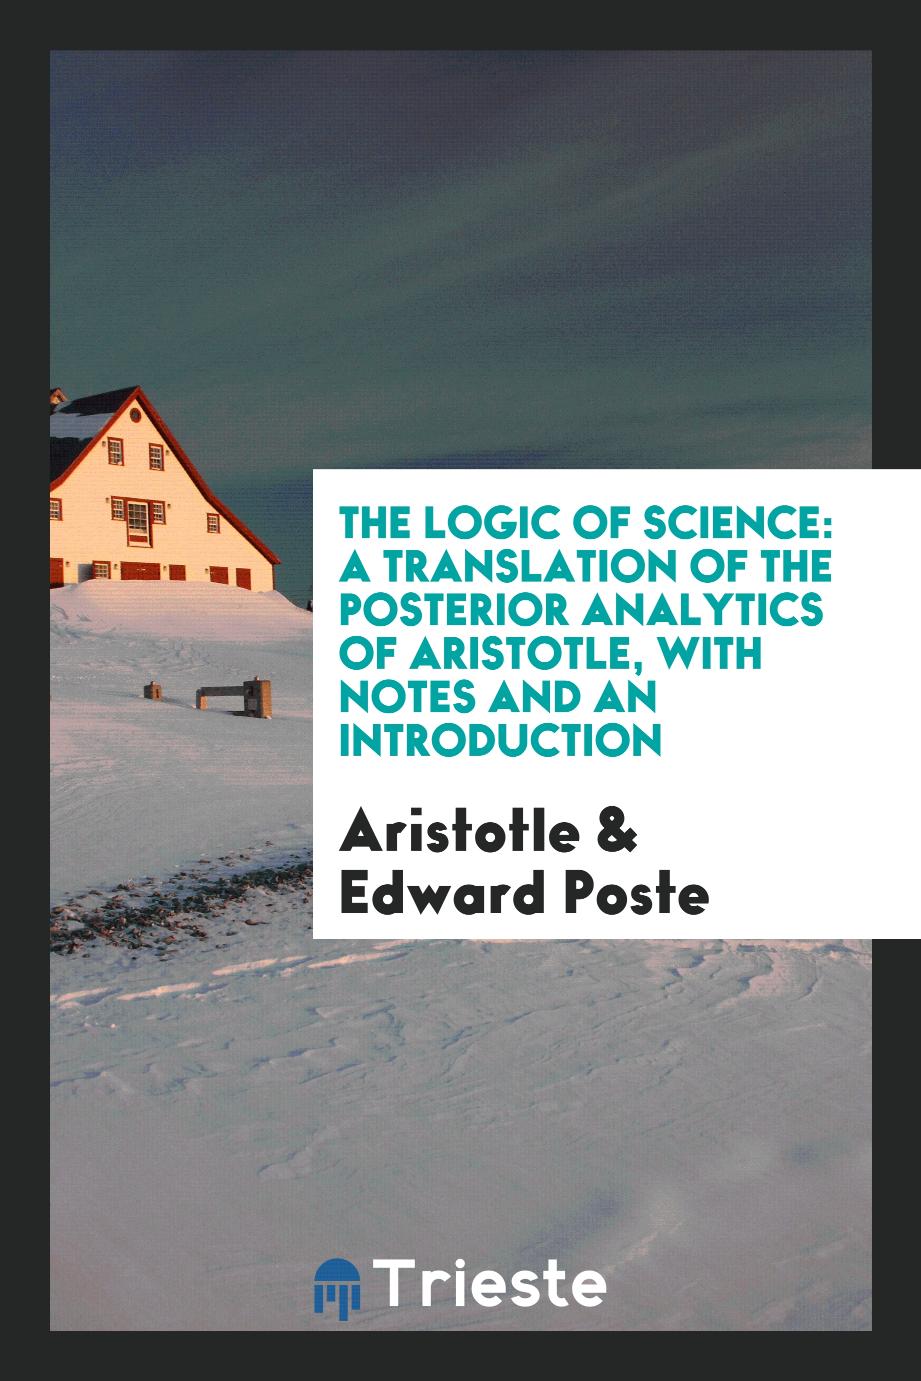 Aristotle, Edward Poste - The Logic of Science: A Translation of the Posterior Analytics of Aristotle, with Notes and an Introduction